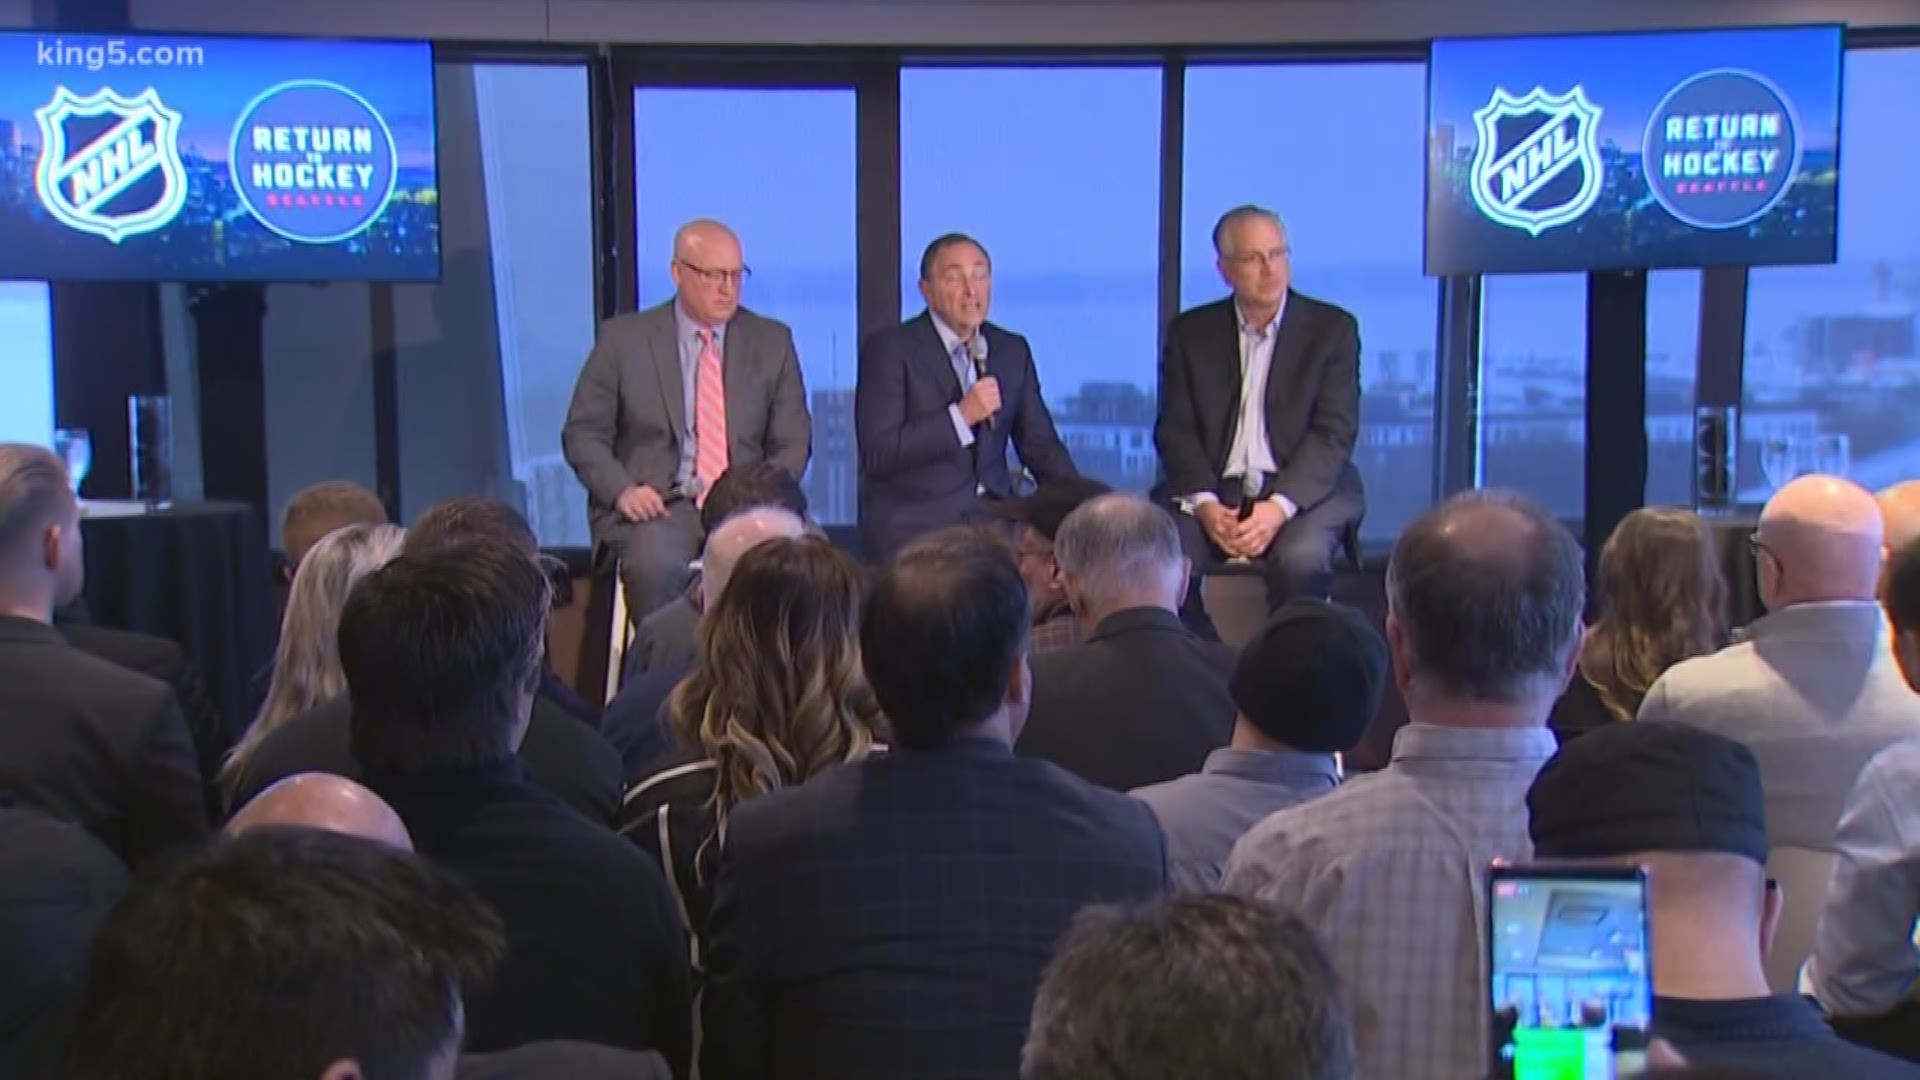 The NHL is coming to Seattle in 2021, and today, the league's top leaders were in the city for the first time since the announcement. It was a barn storming tour around the city that included some key hints about the future. KING 5's Chris Daniels has the story.